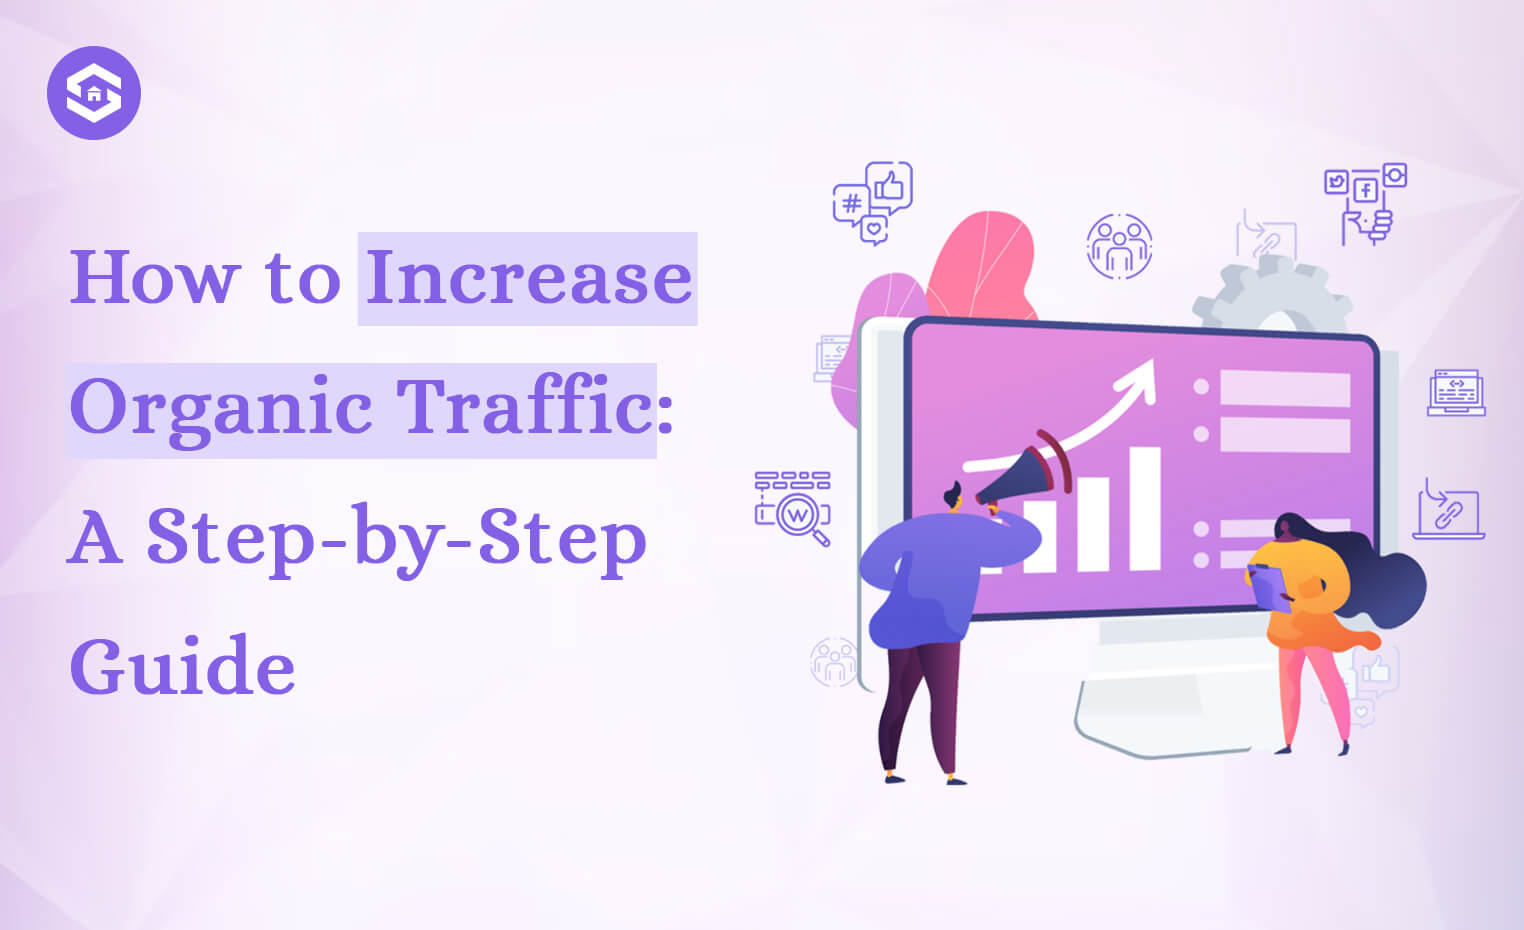 How to Increase Organic Traffic: A Step-by-Step Guide